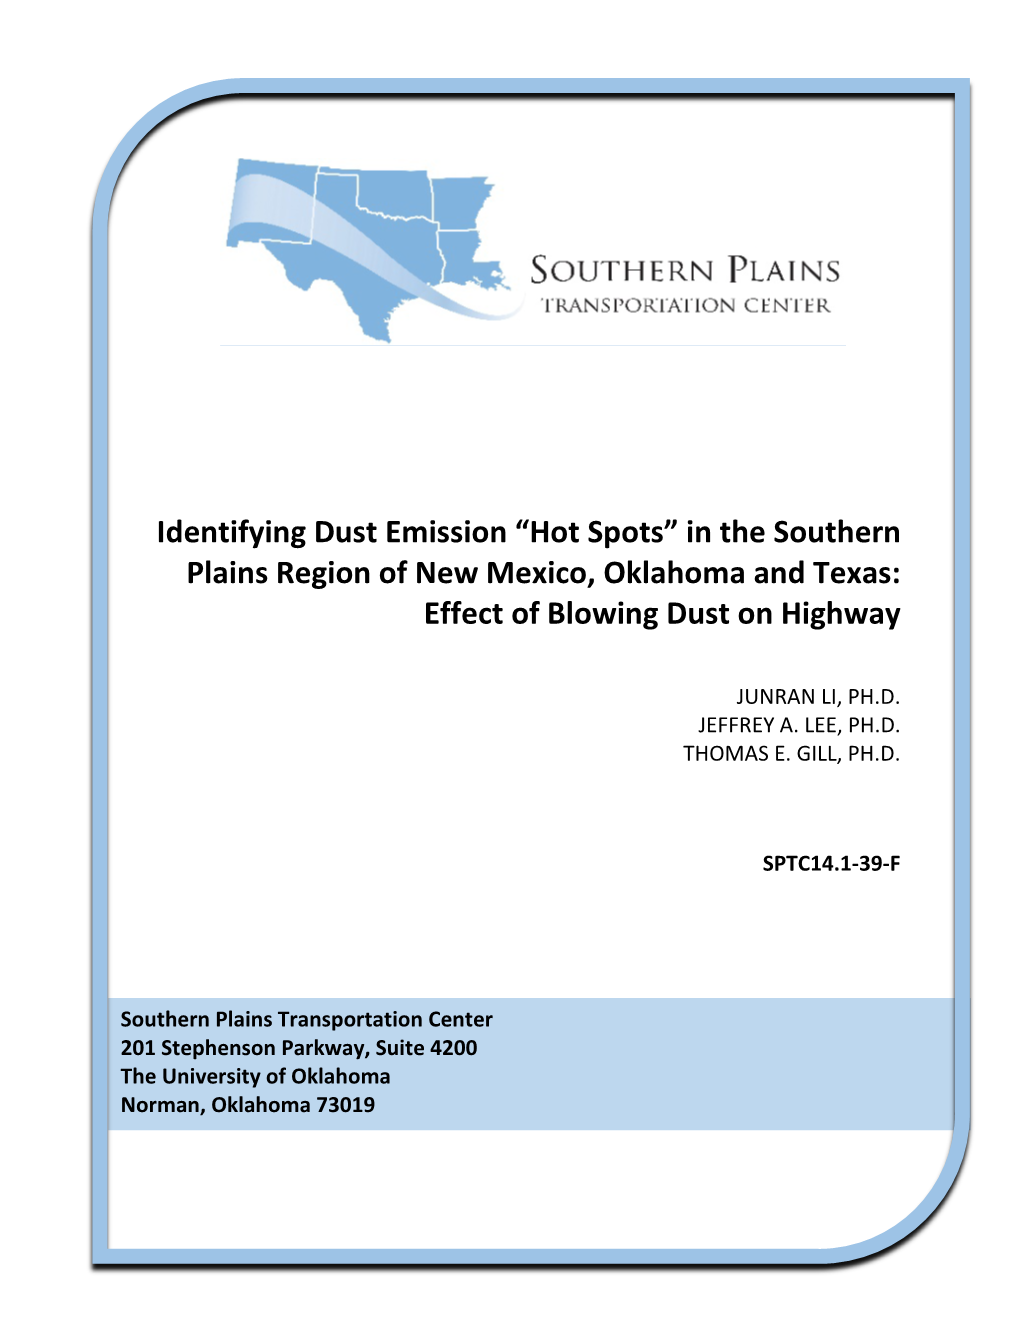 Identifying Dust Emission “Hot Spots” in the Southern Plains Region of New Mexico, Oklahoma and Texas: Effect of Blowing Dust on Highway